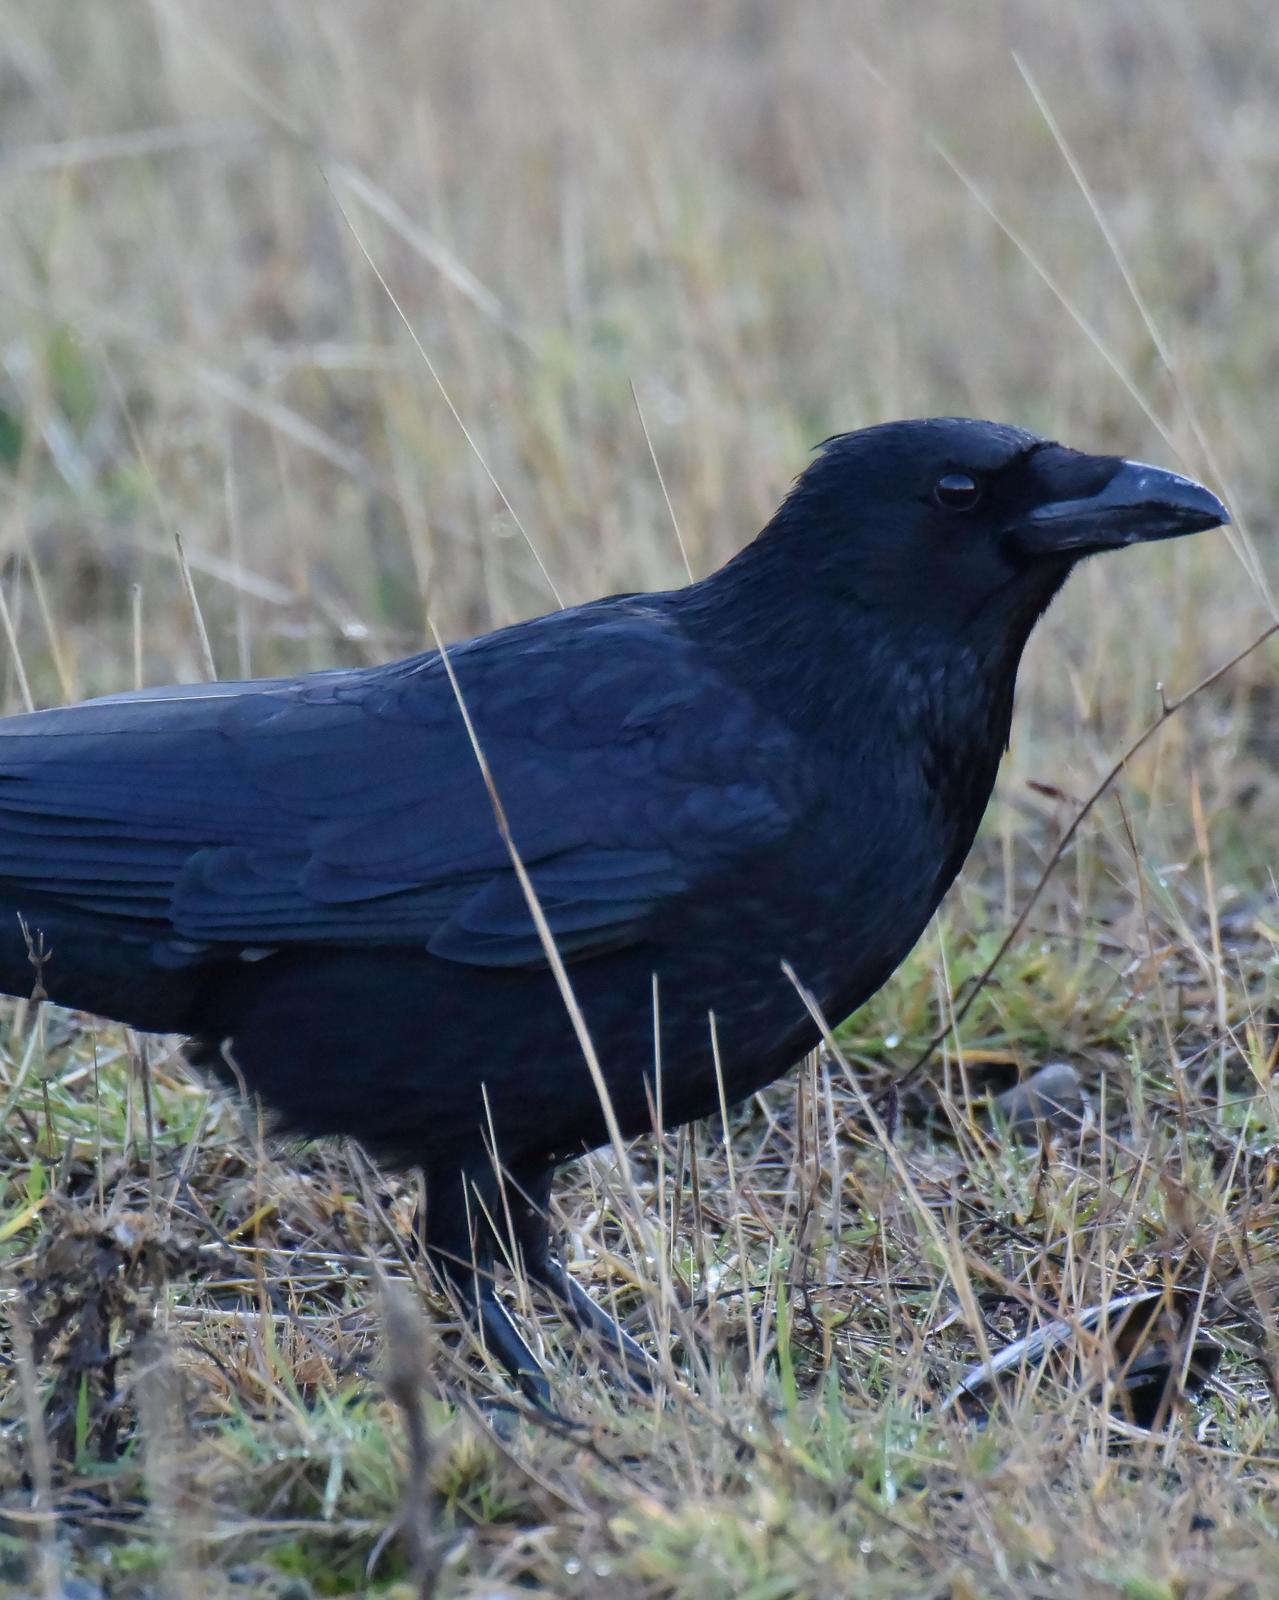 Carrion Crow Photo by Steve Percival